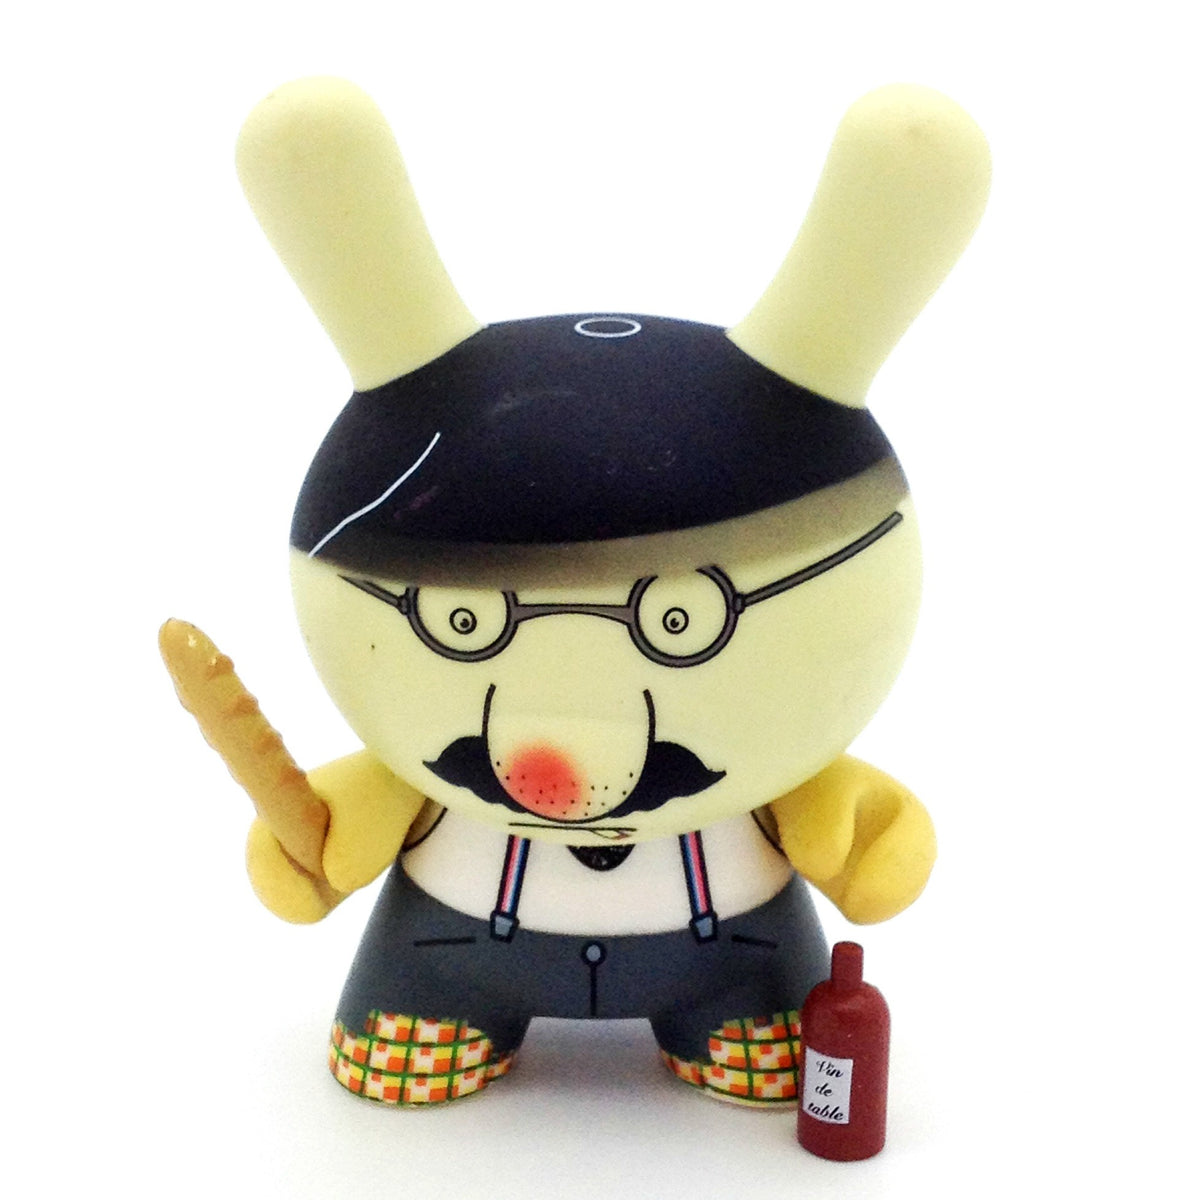 French Dunny Series - Dunny with Baguette and Wine (Der) - Mindzai
